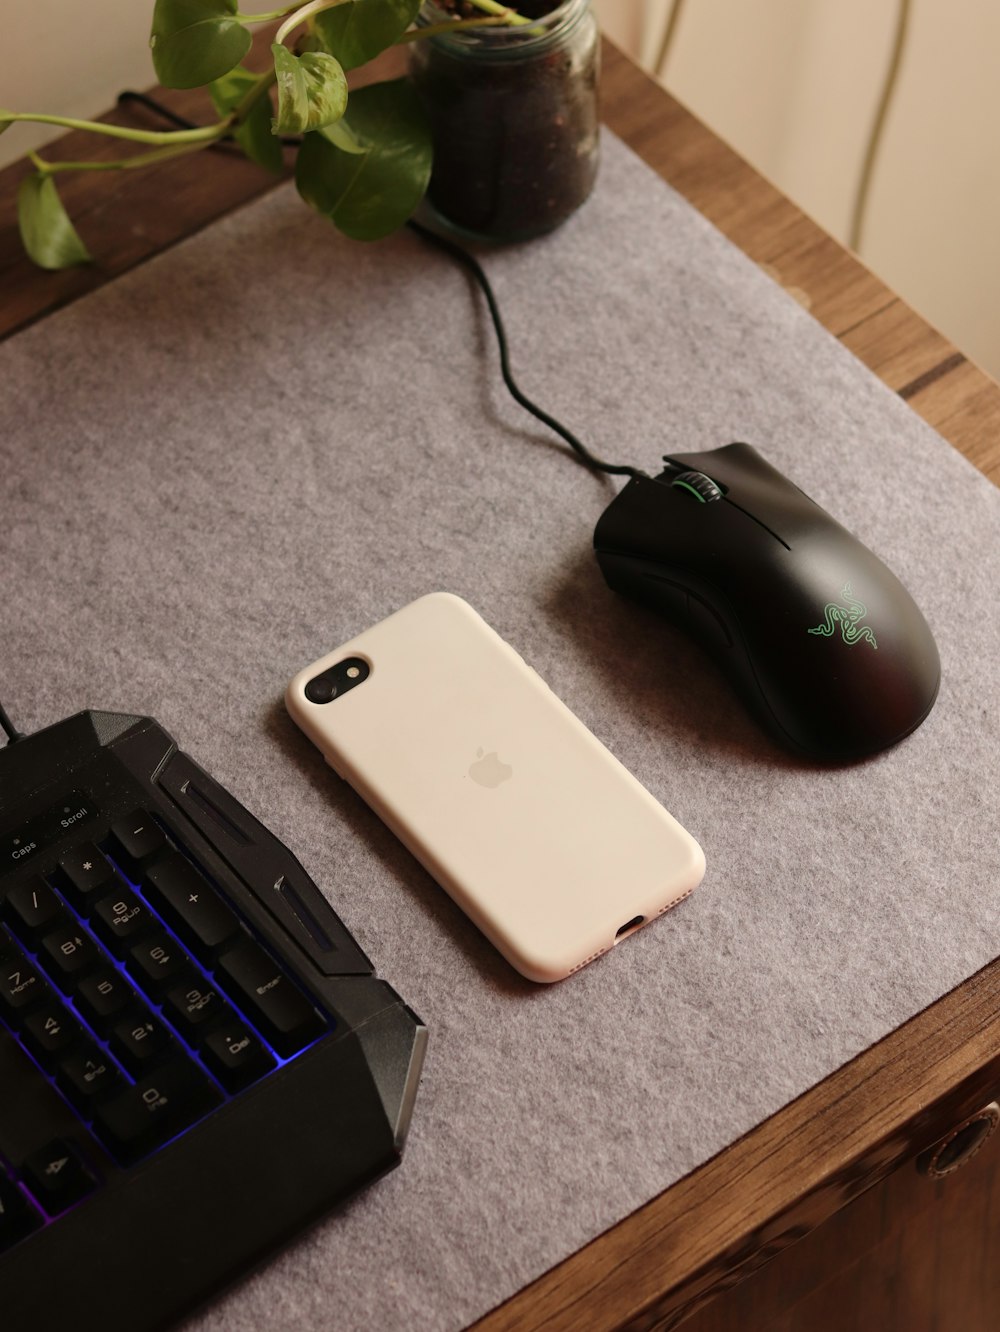 a computer mouse, keyboard, and phone on a table